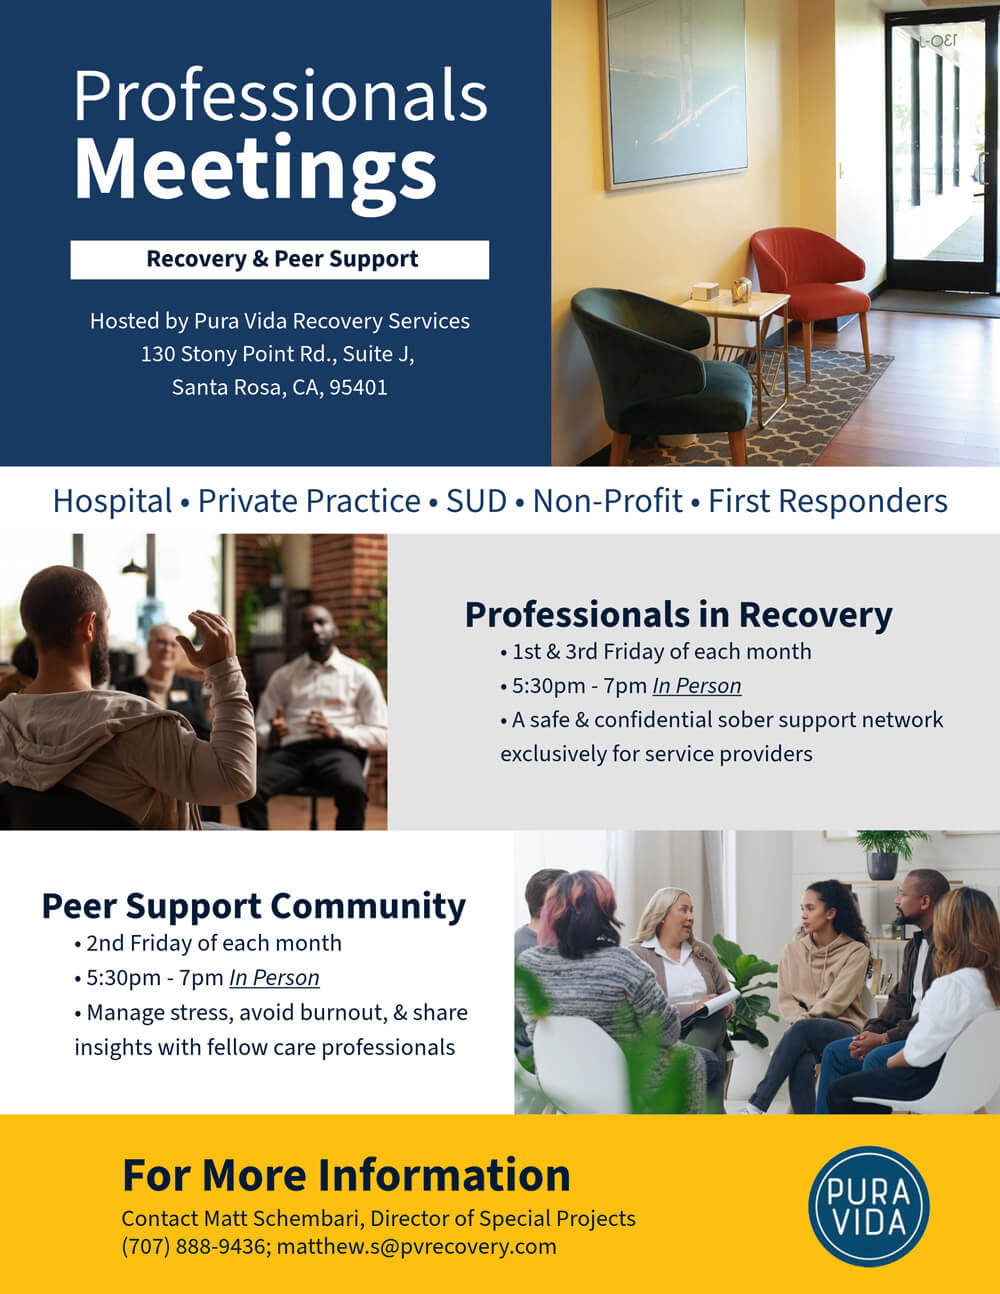 Professional Meetings: Recovery & Peer Support, Hosted by Pura Vida Recovery Services